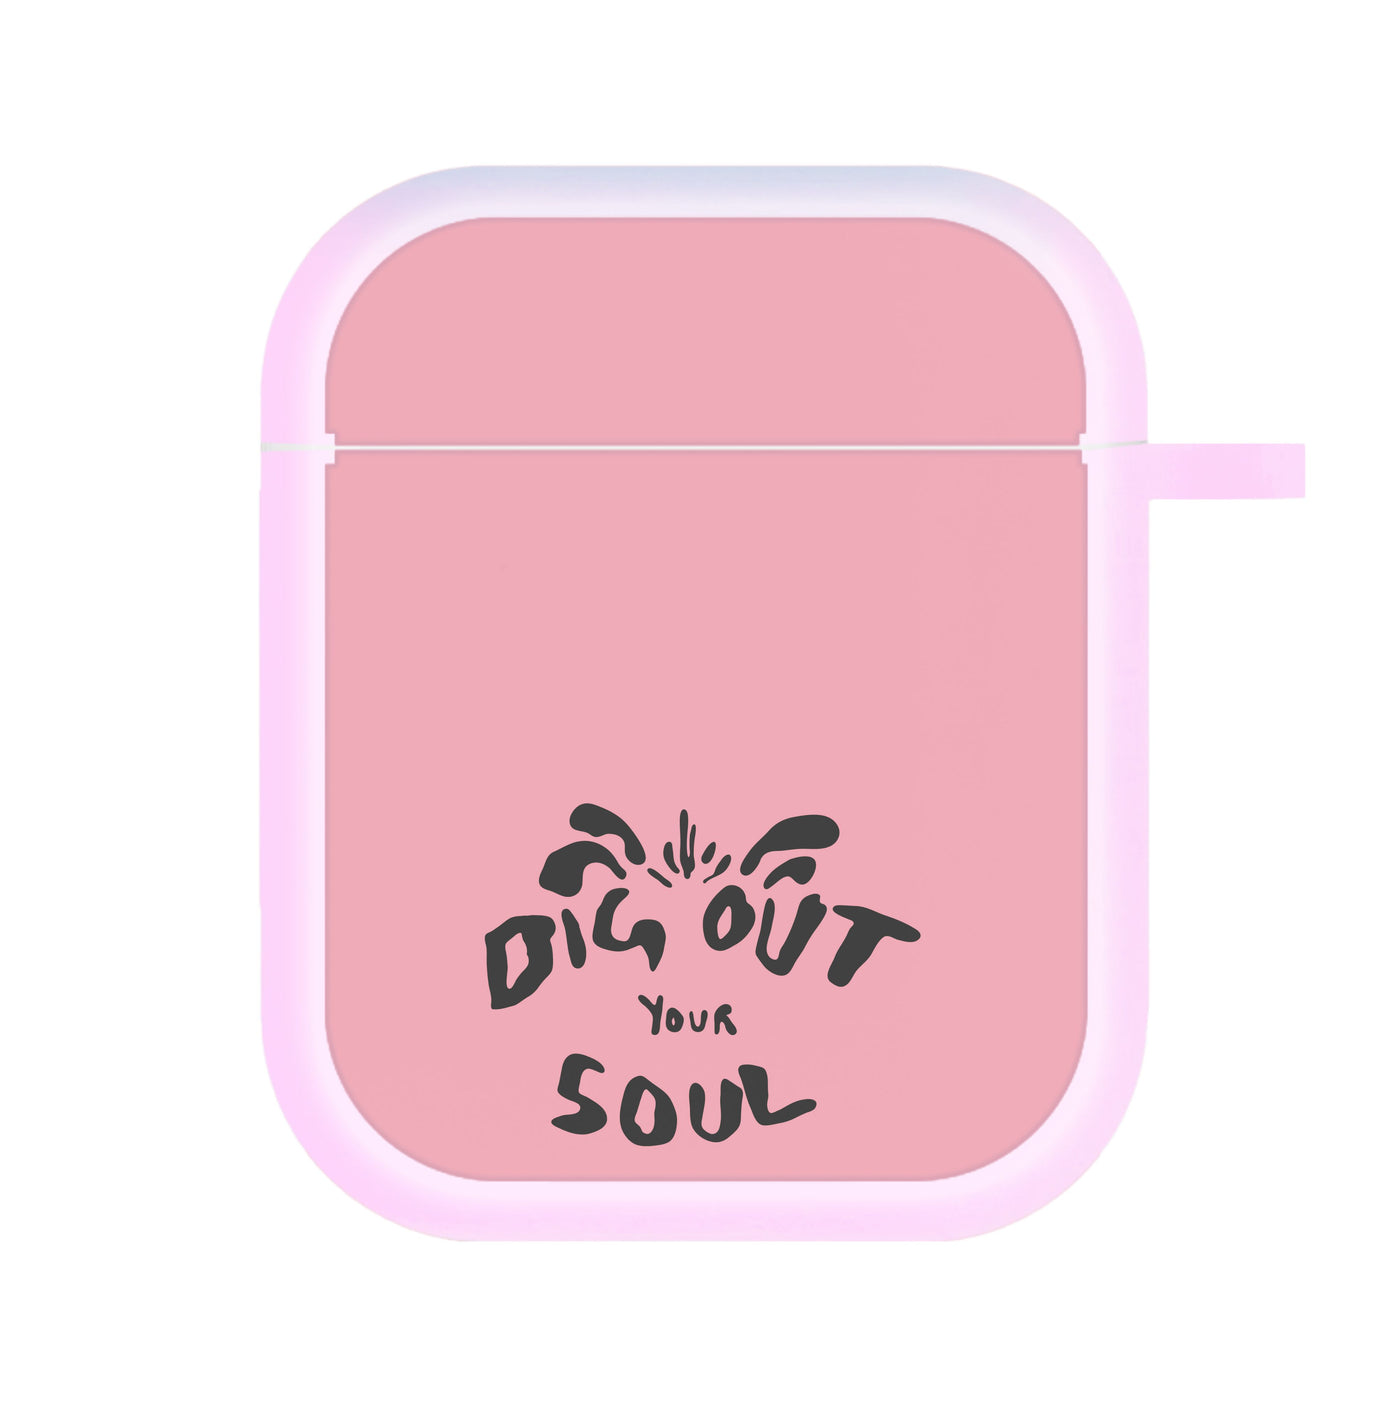 Dig Out Your Soul - Oasis AirPods Case